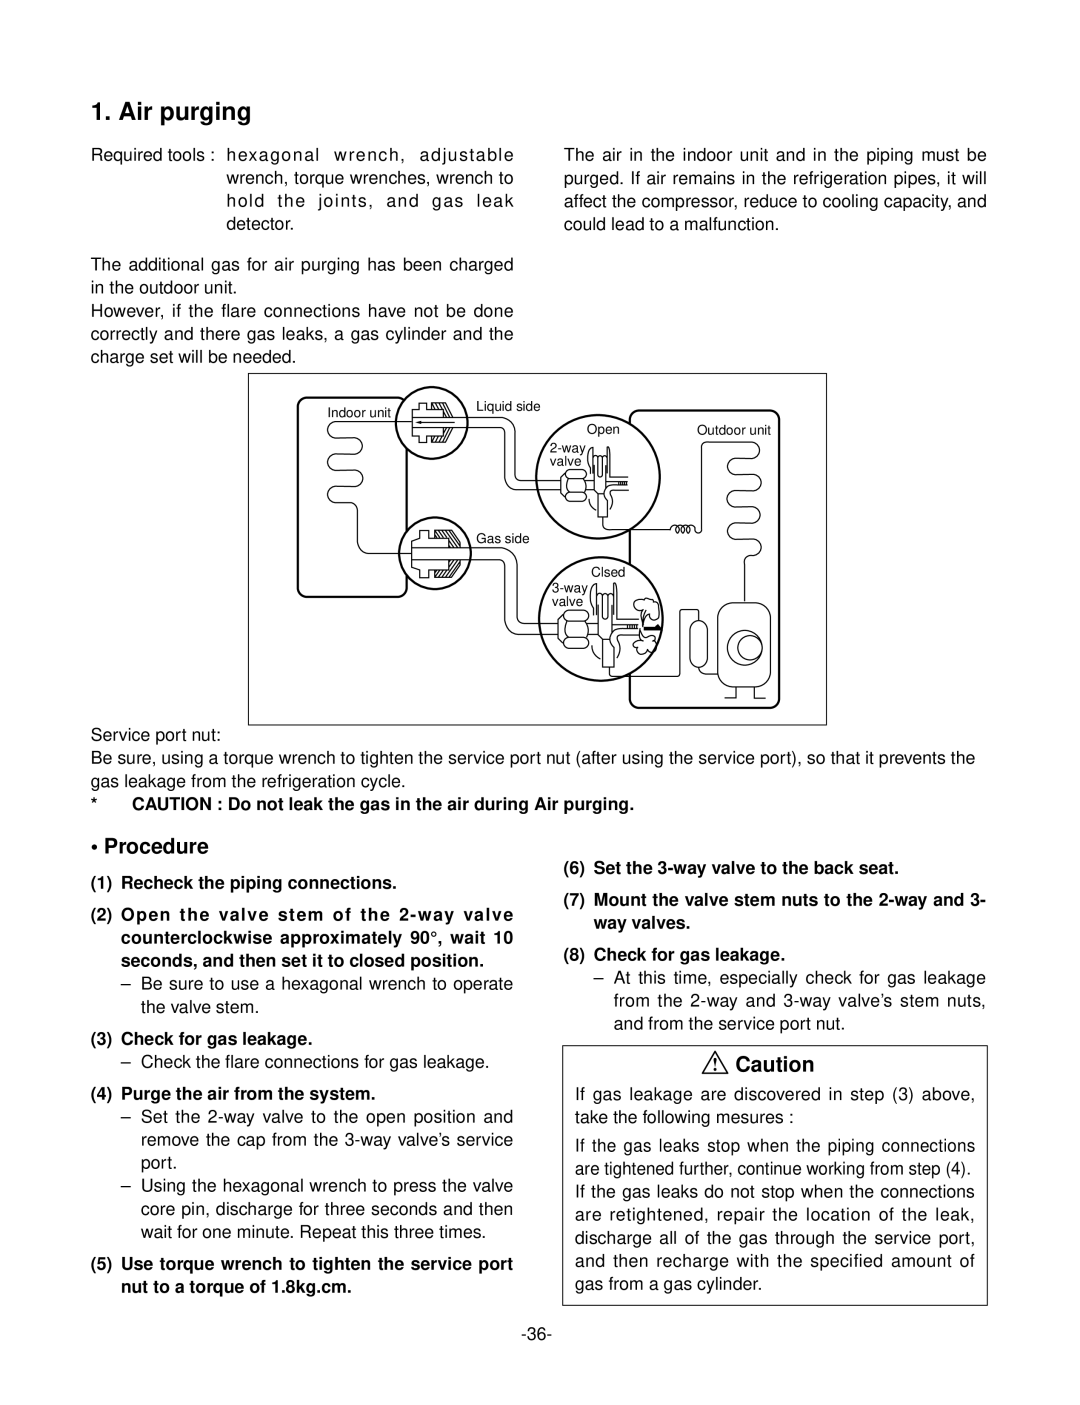 LG Electronics LSC183VMA Procedure, CAUTION Do not leak the gas in the air during Air purging, Check for gas leakage 